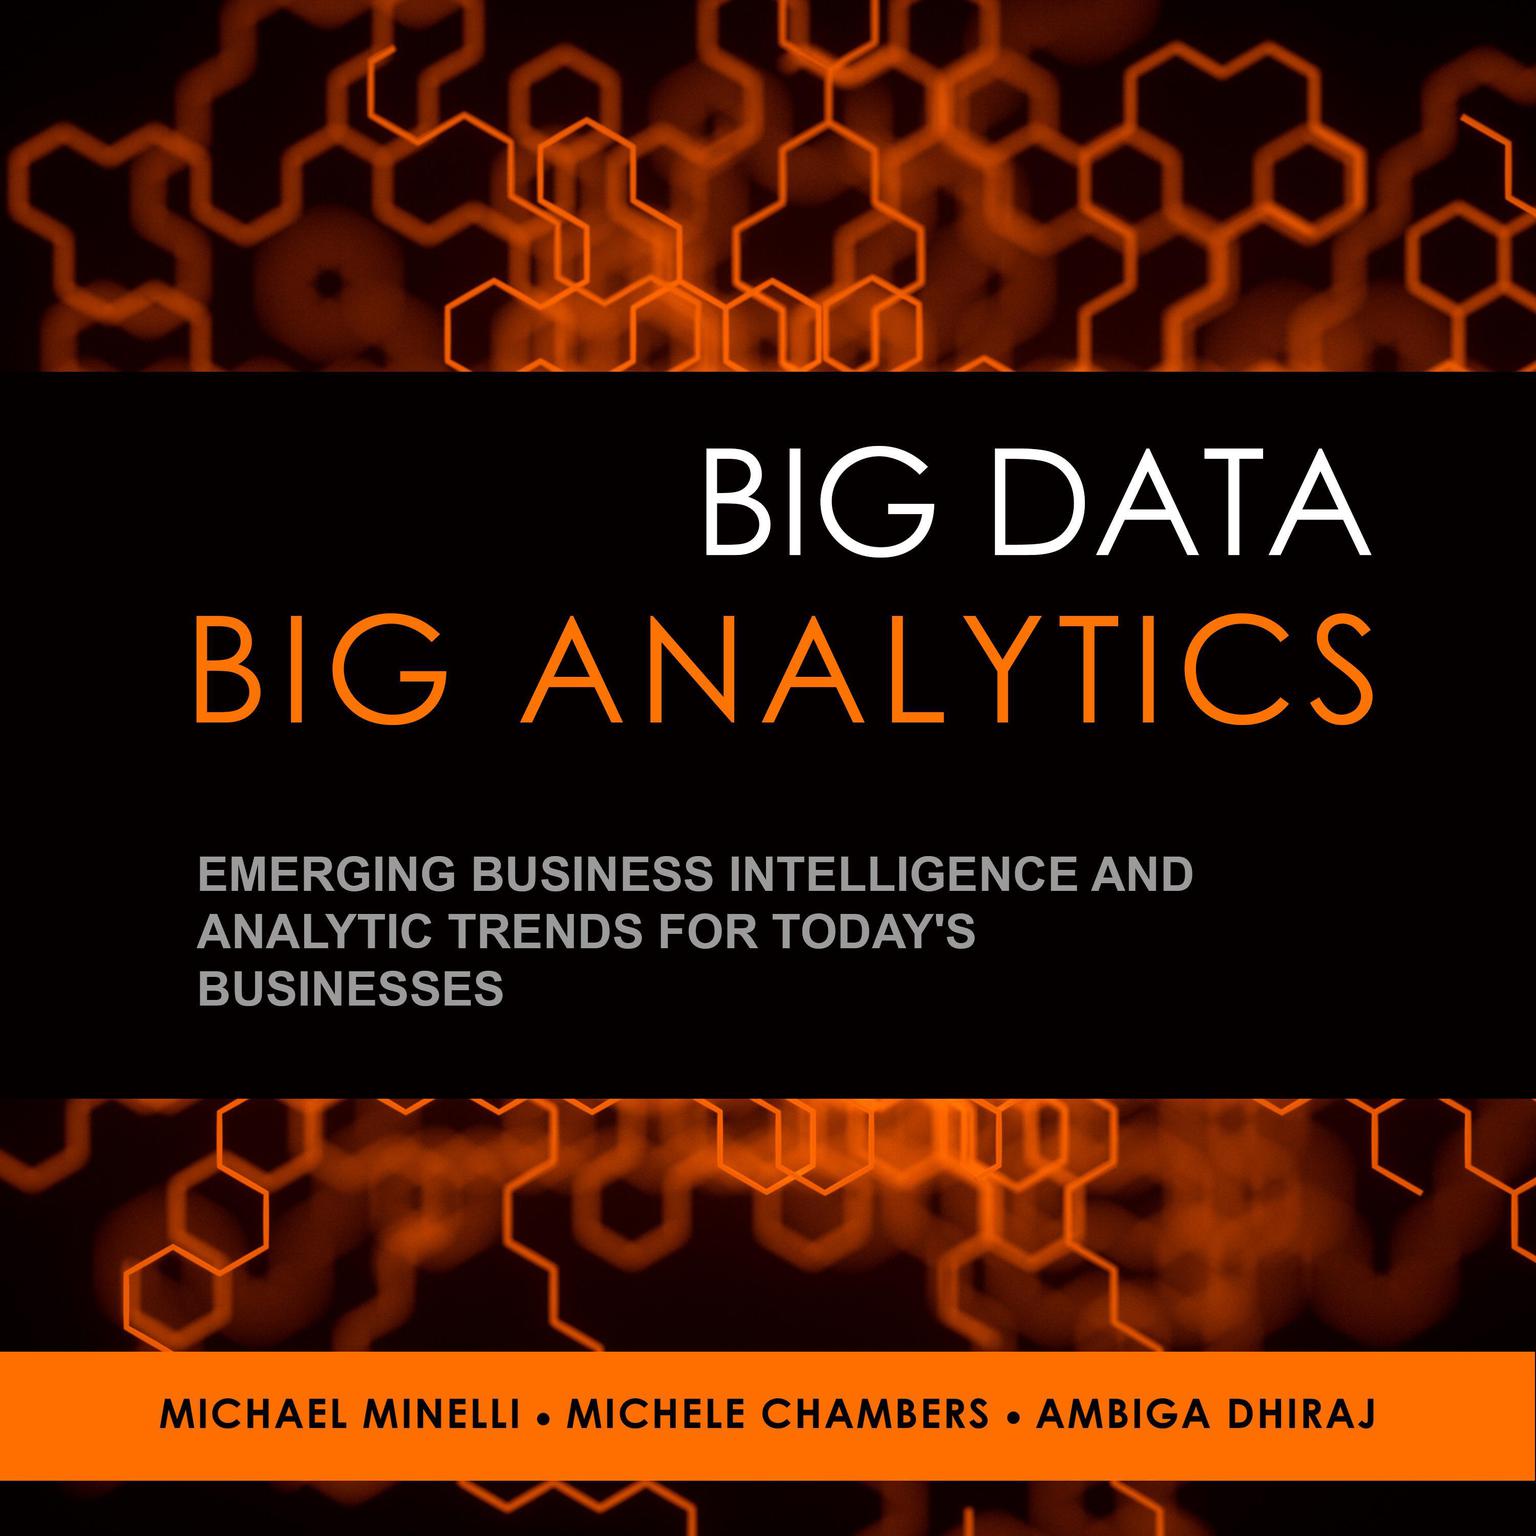 Big Data, Big Analytics: Emerging Business Intelligence and Analytic Trends for Todays Businesses Audiobook, by Michael Minelli